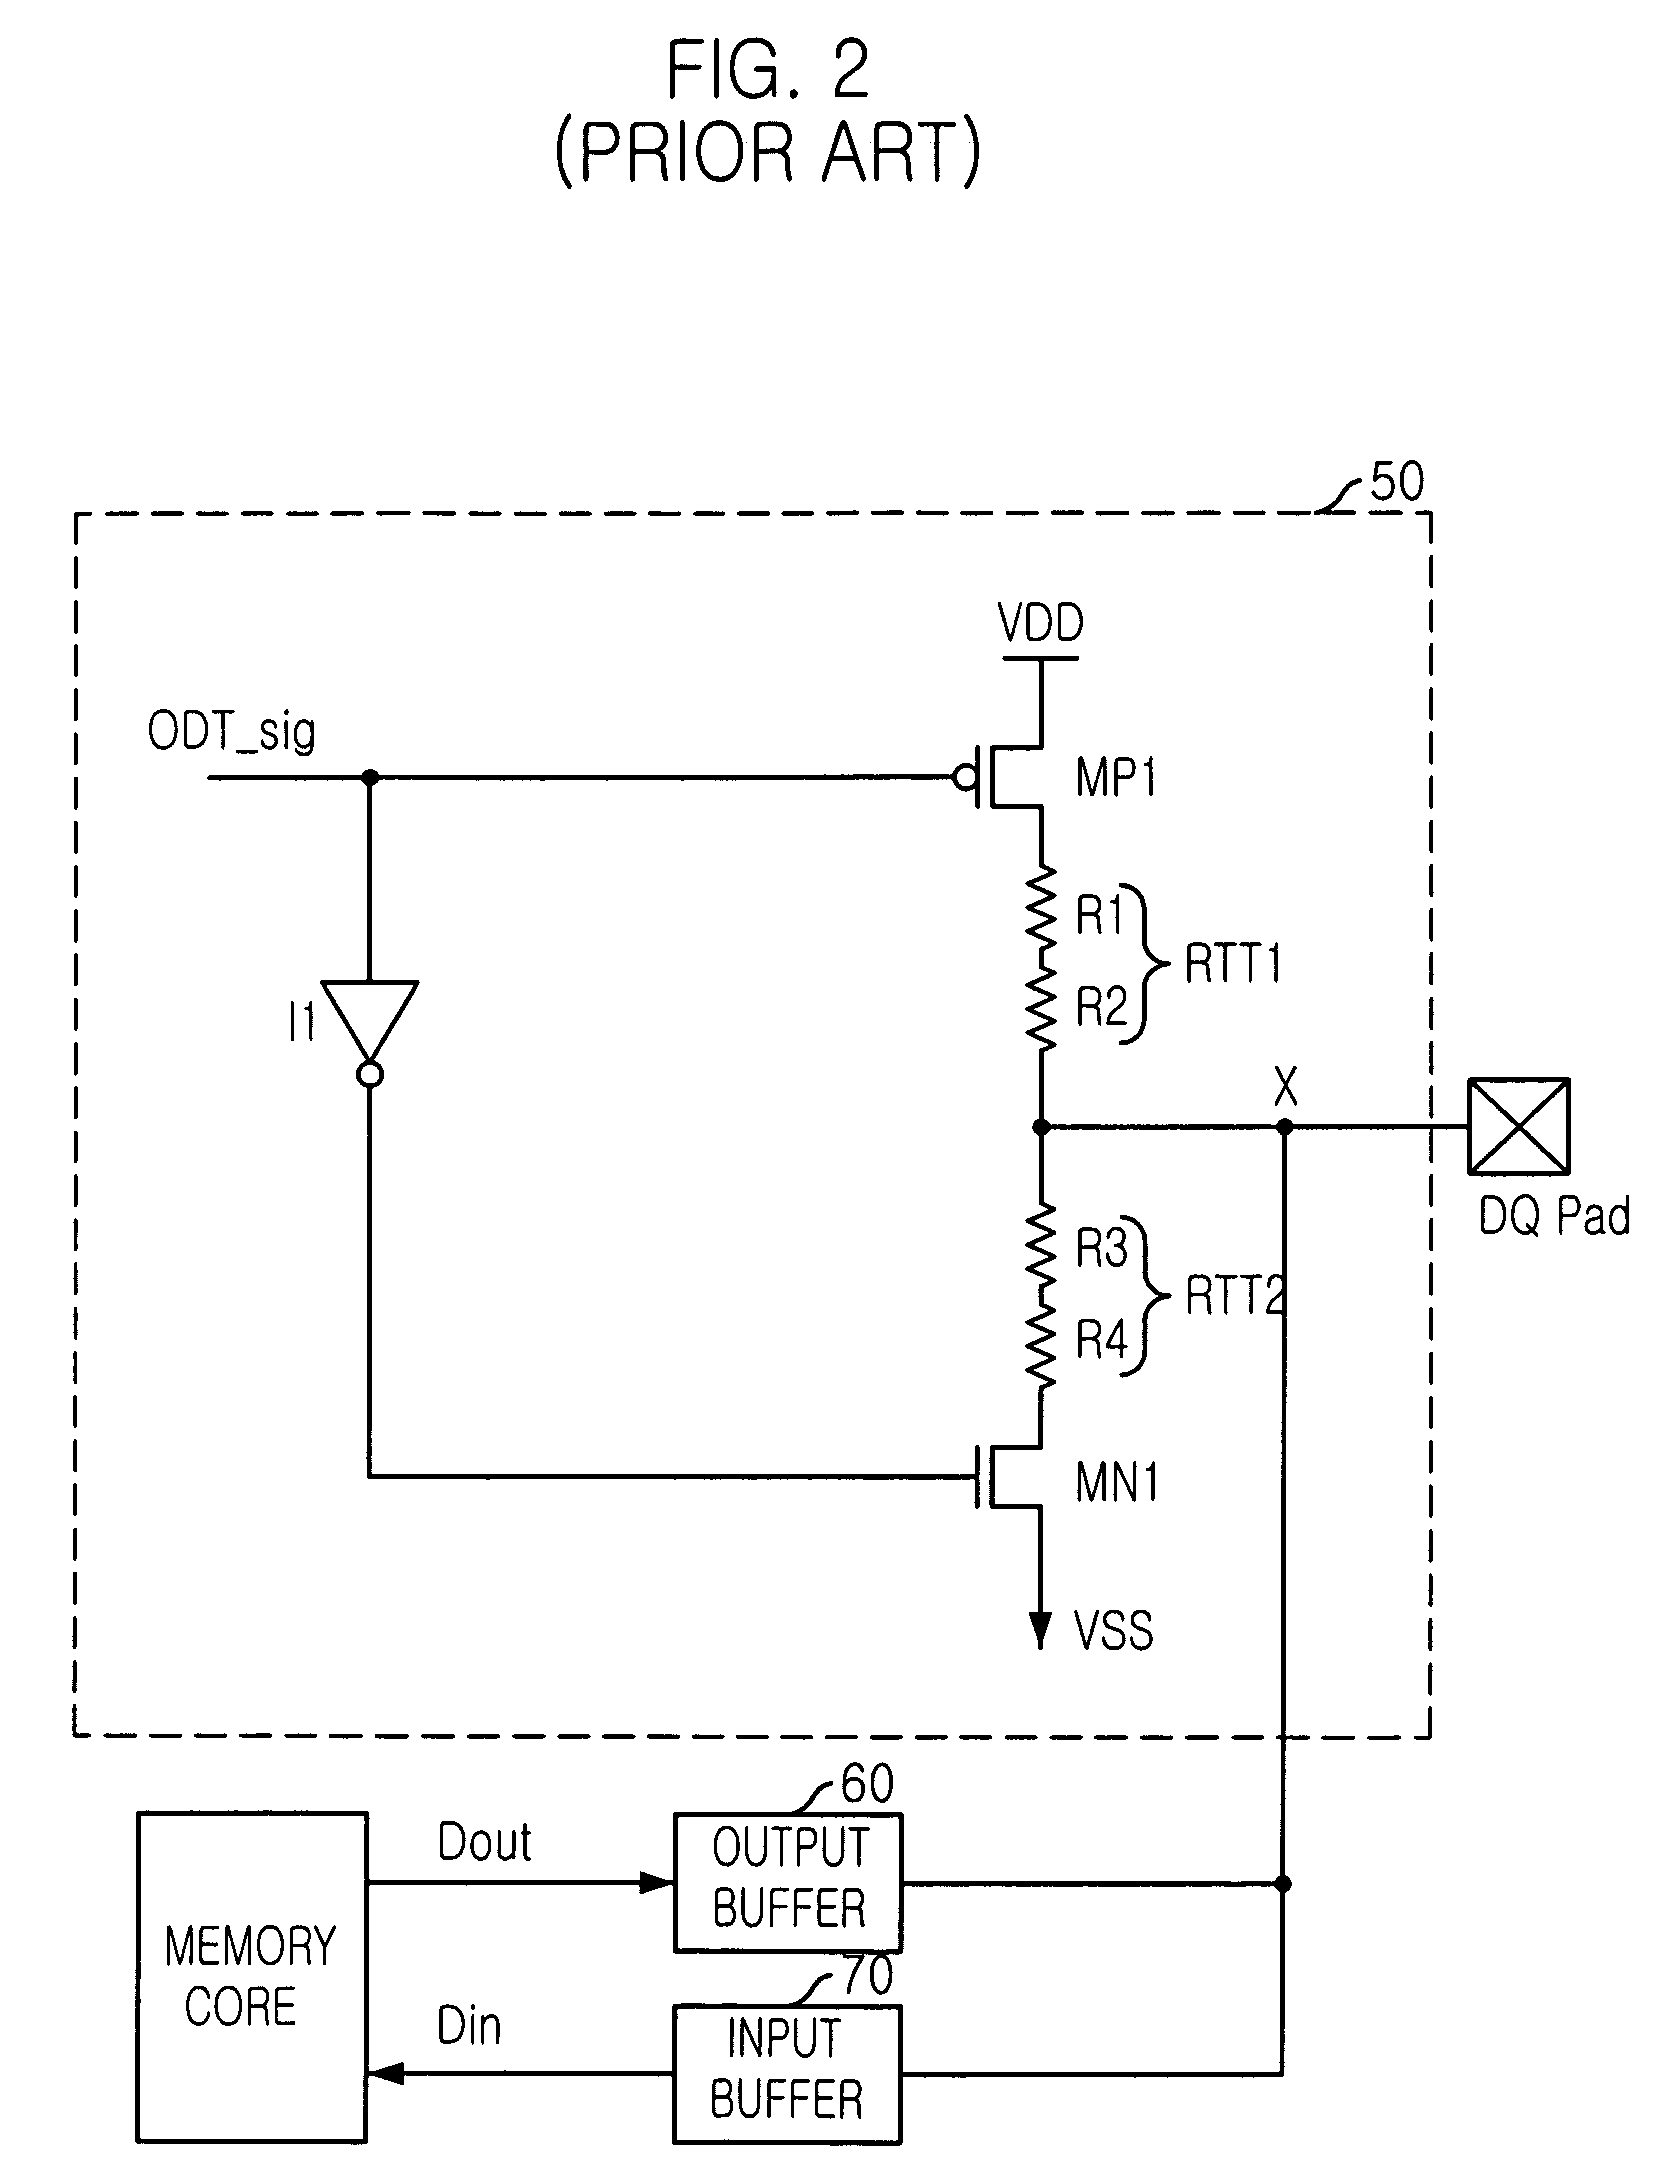 Semiconductor memory device with on die termination circuit